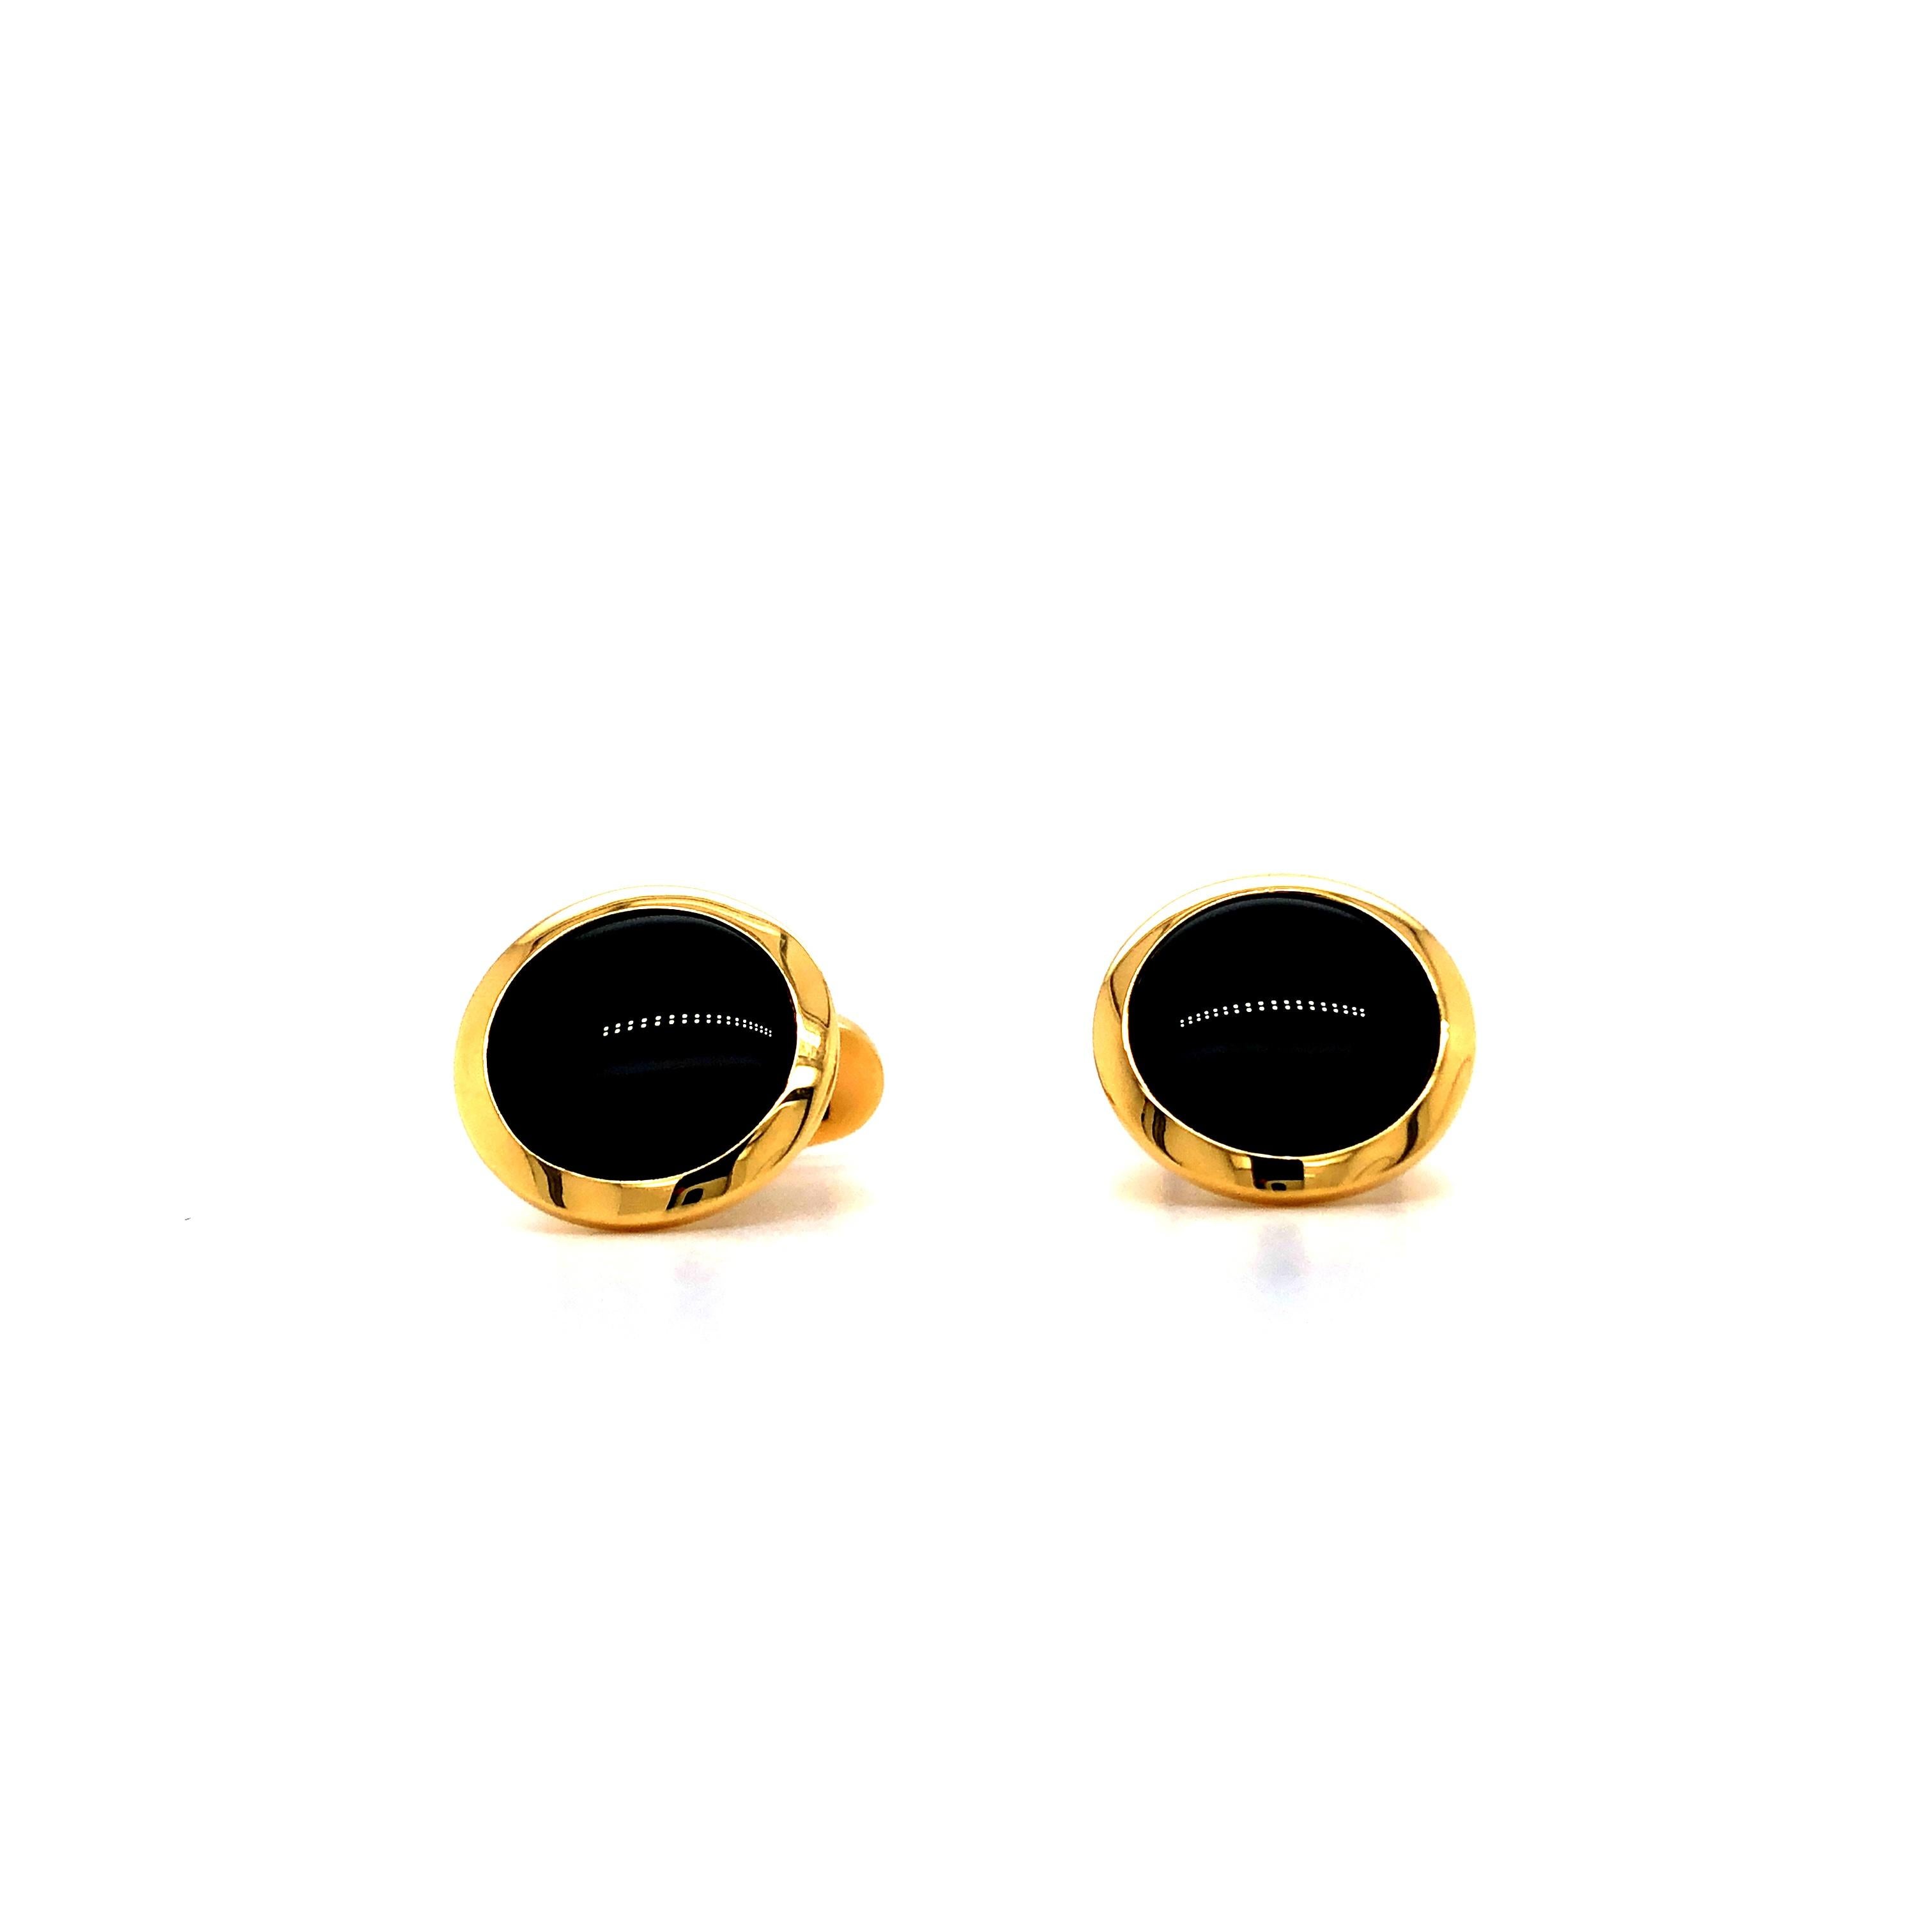 Victor Mayer round Cufflinks with Domed Bezel, Hallmark Collection, 18k Yellow Gold, 1 Black Onyx, Diameter approx. 15.0 mm

About the creator Victor Mayer
Victor Mayer is internationally renowned for elegant timeless designs and unrivalled